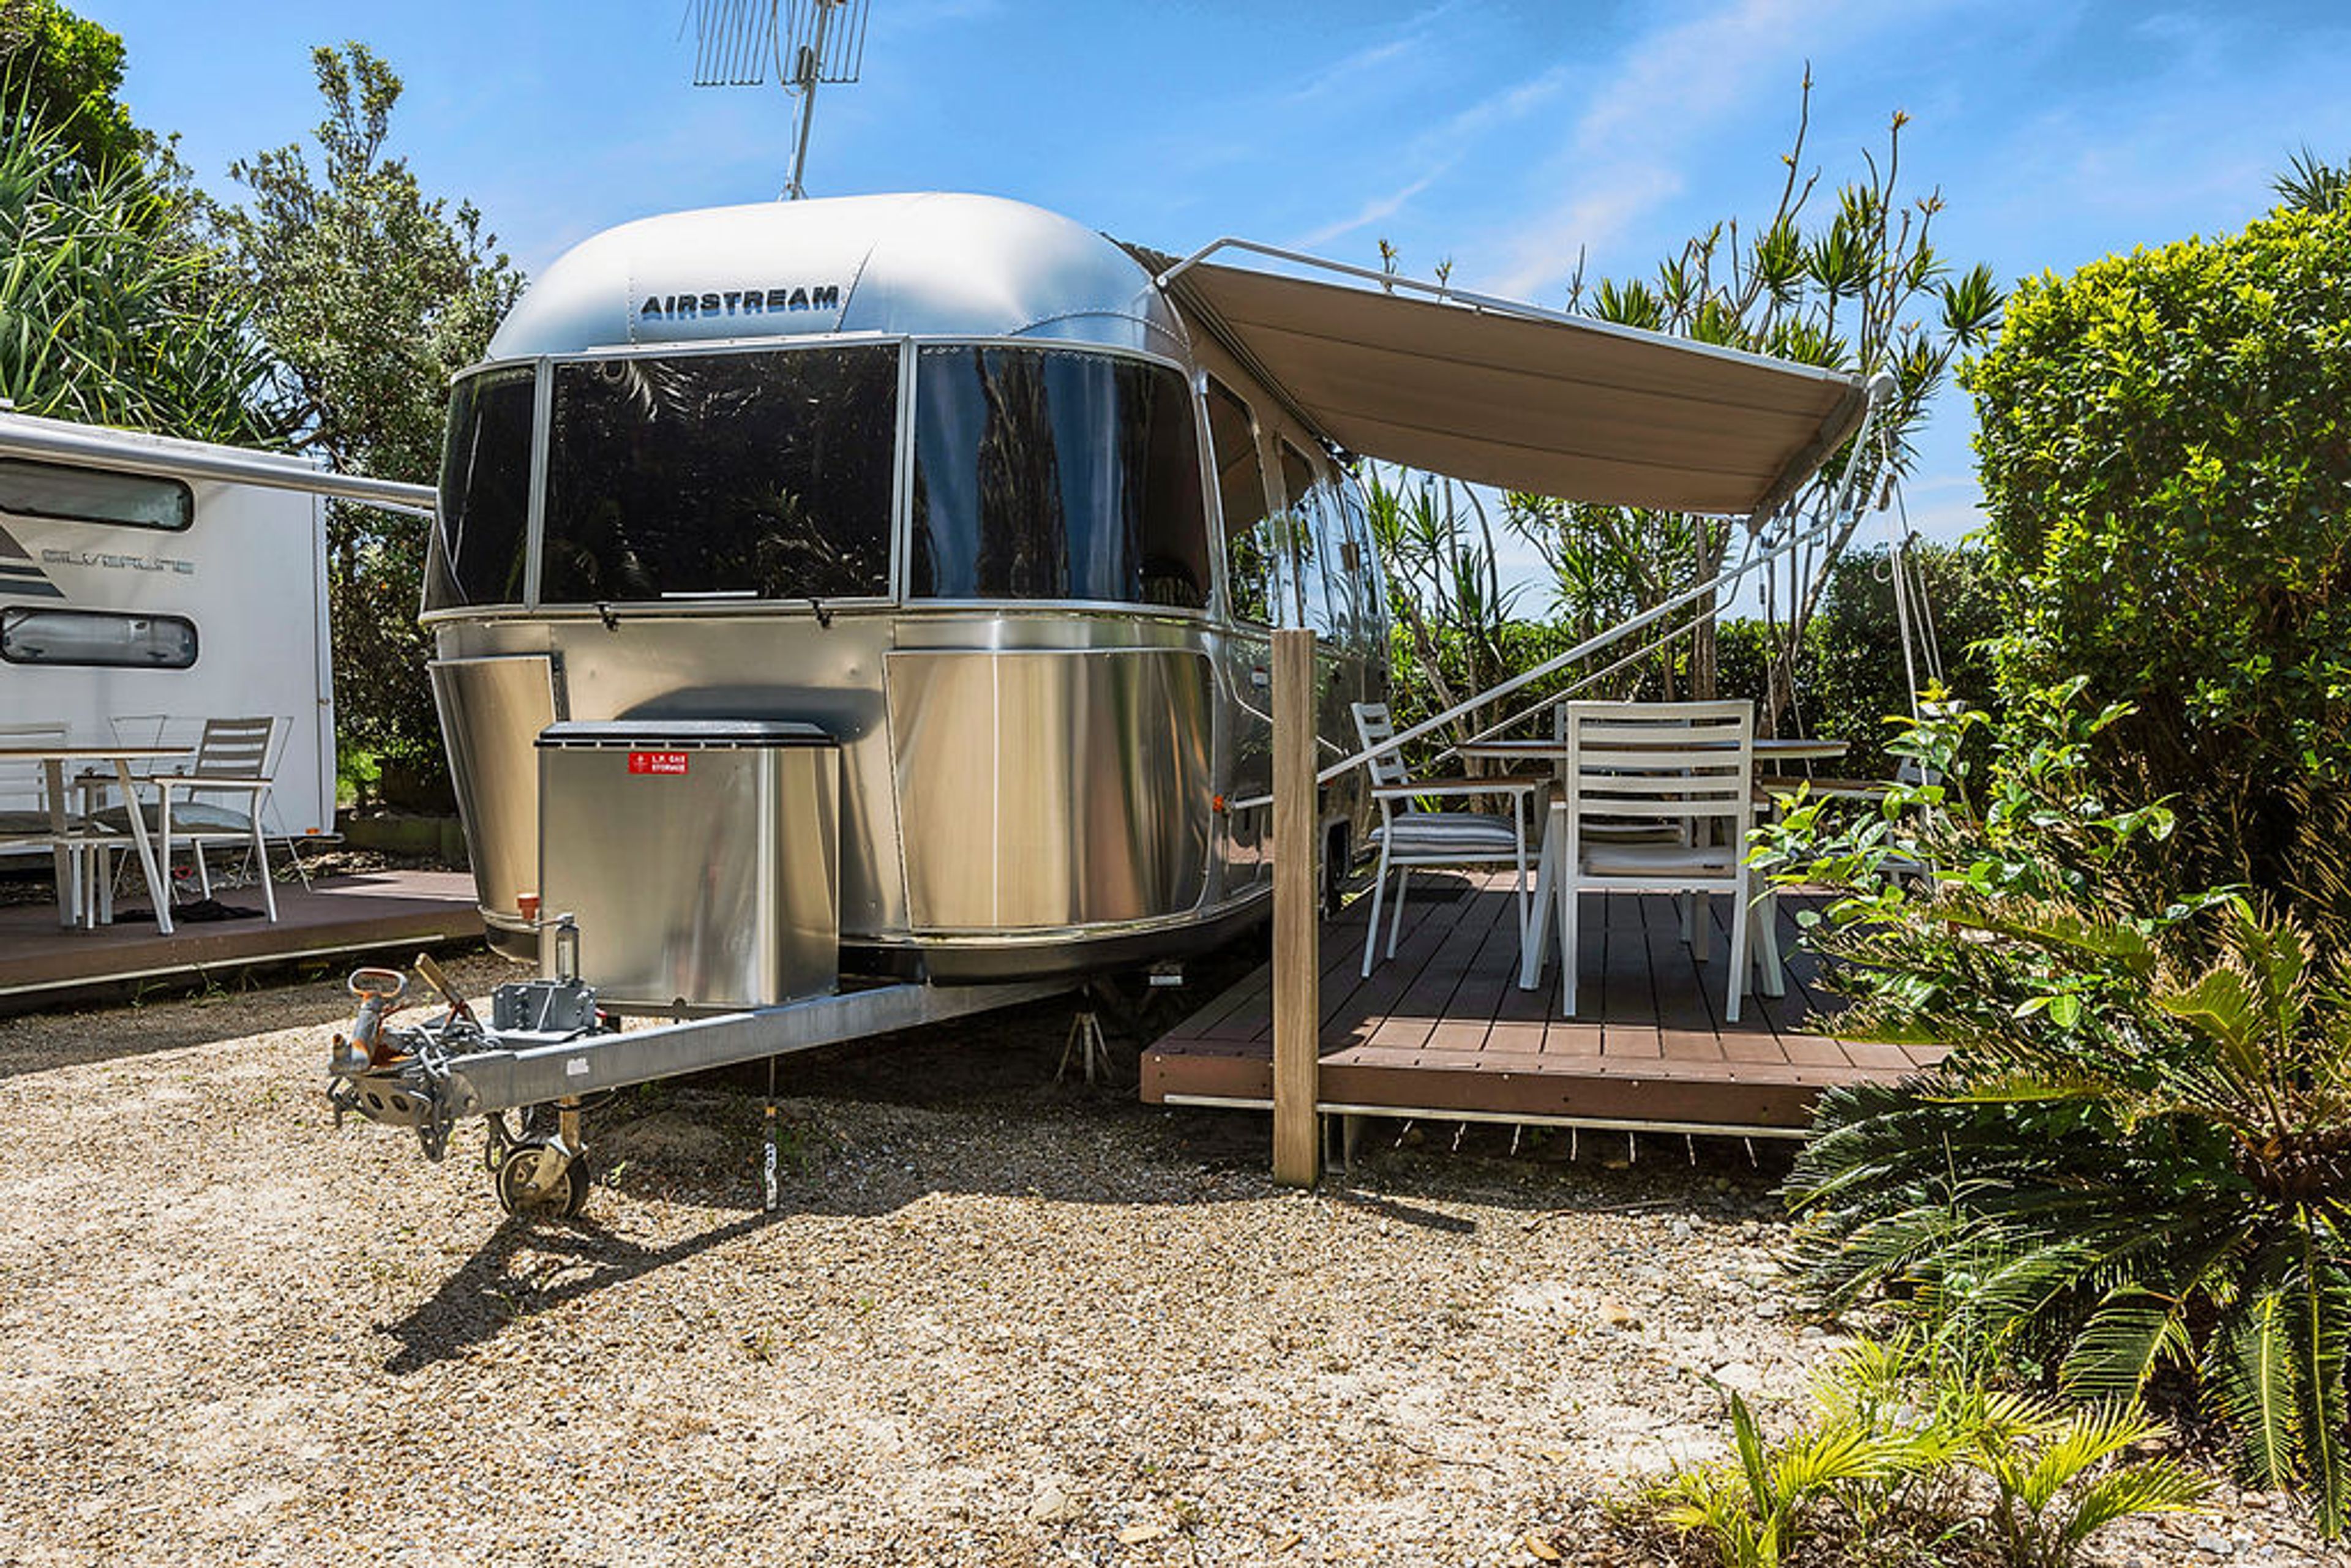 Byron Bay Jayco Airstream - front view